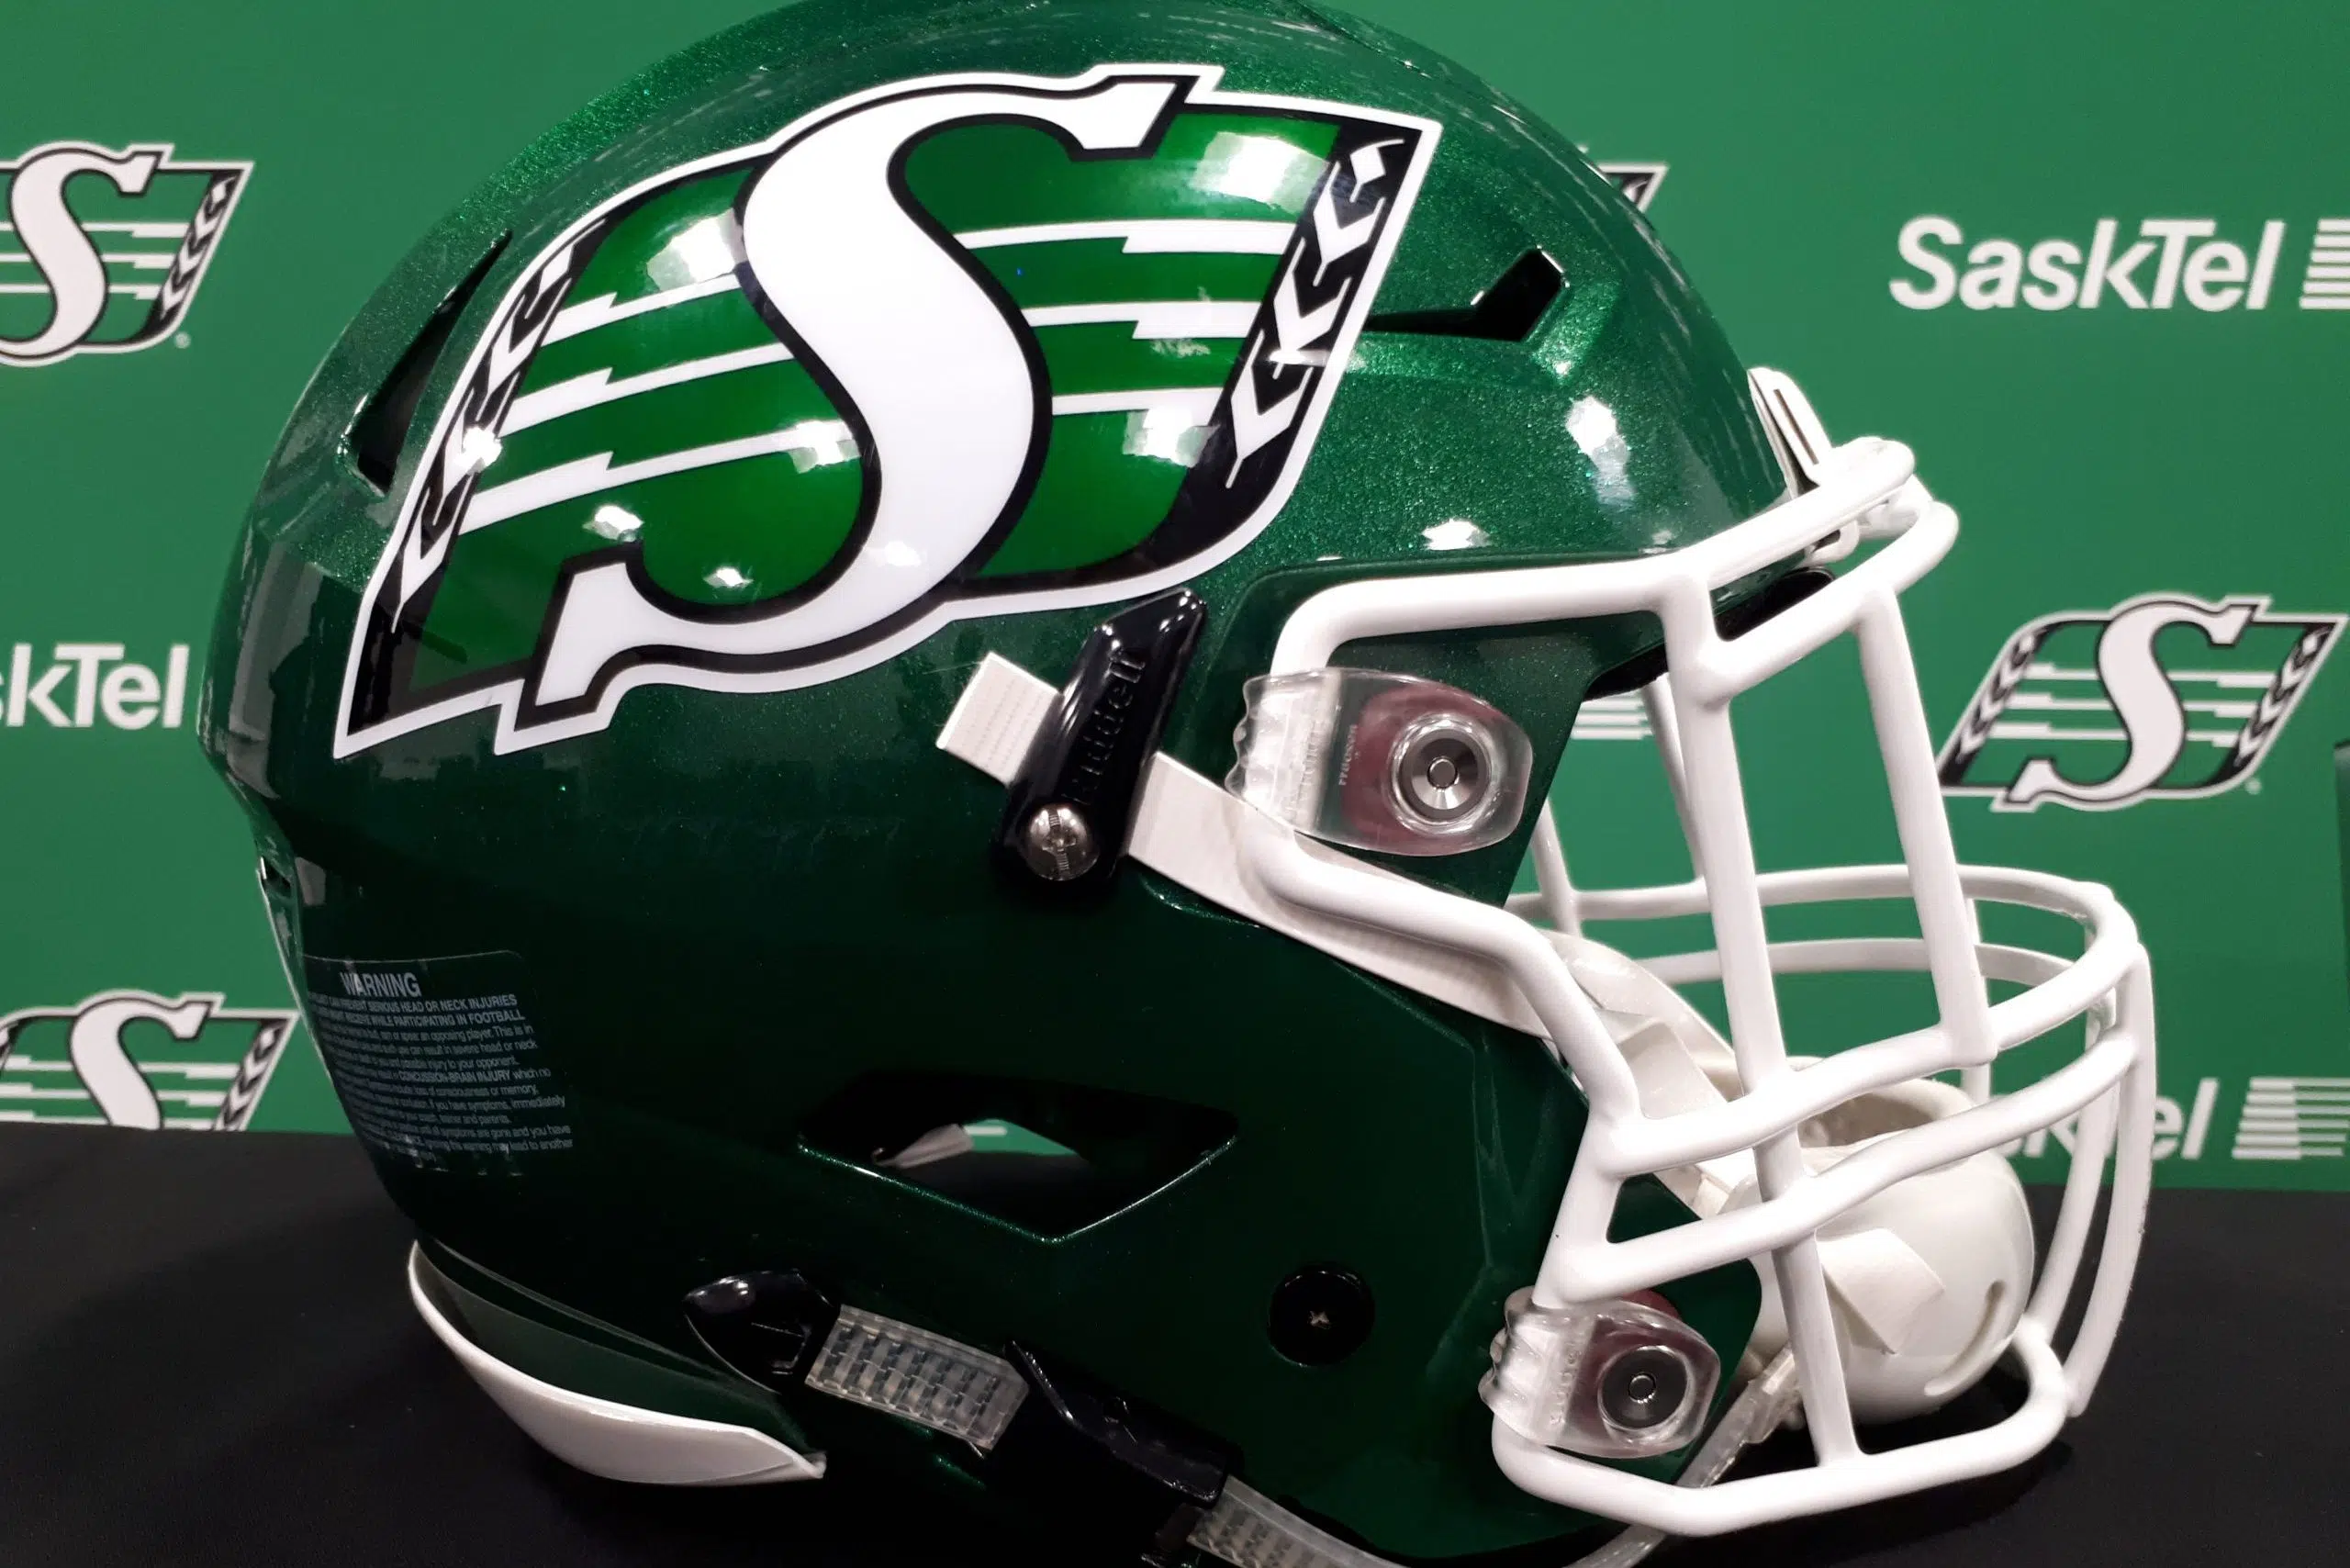 Roughriders beat Alouettes 27-25 with last-minute Lauther field goal